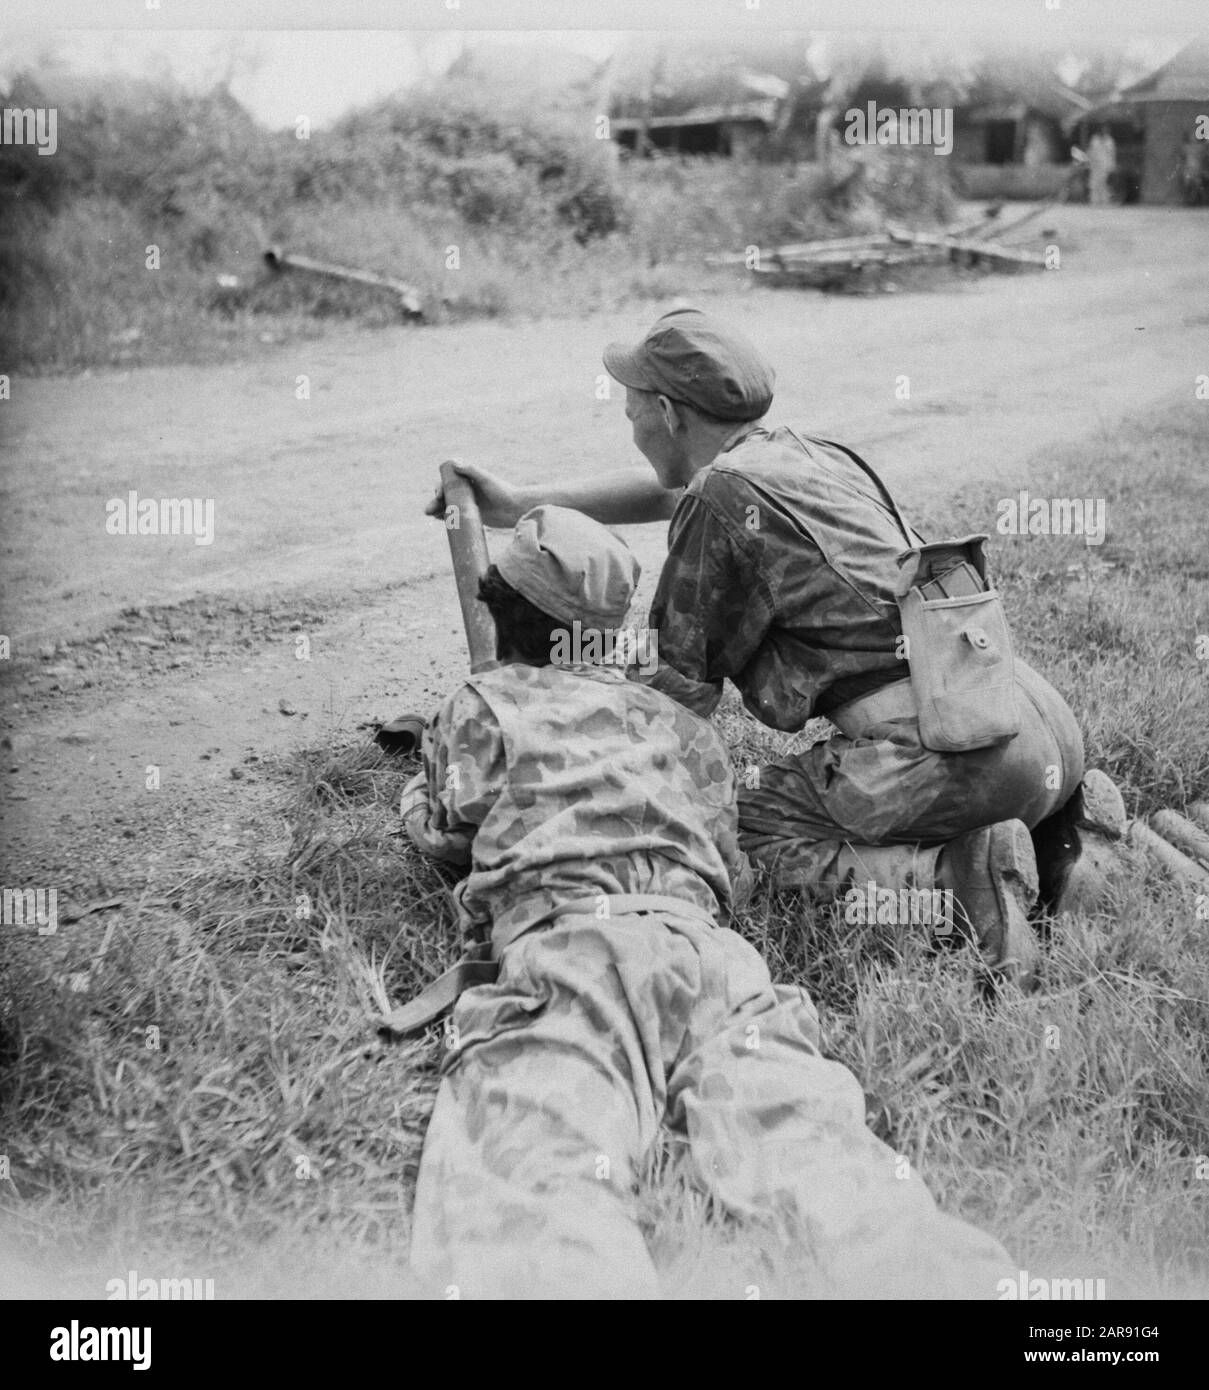 Two soldiers with a light mortar in position along the road Annotation: DJKNIET IN order Date: 1947 Location: Indonesia, Dutch East Indies Stock Photo